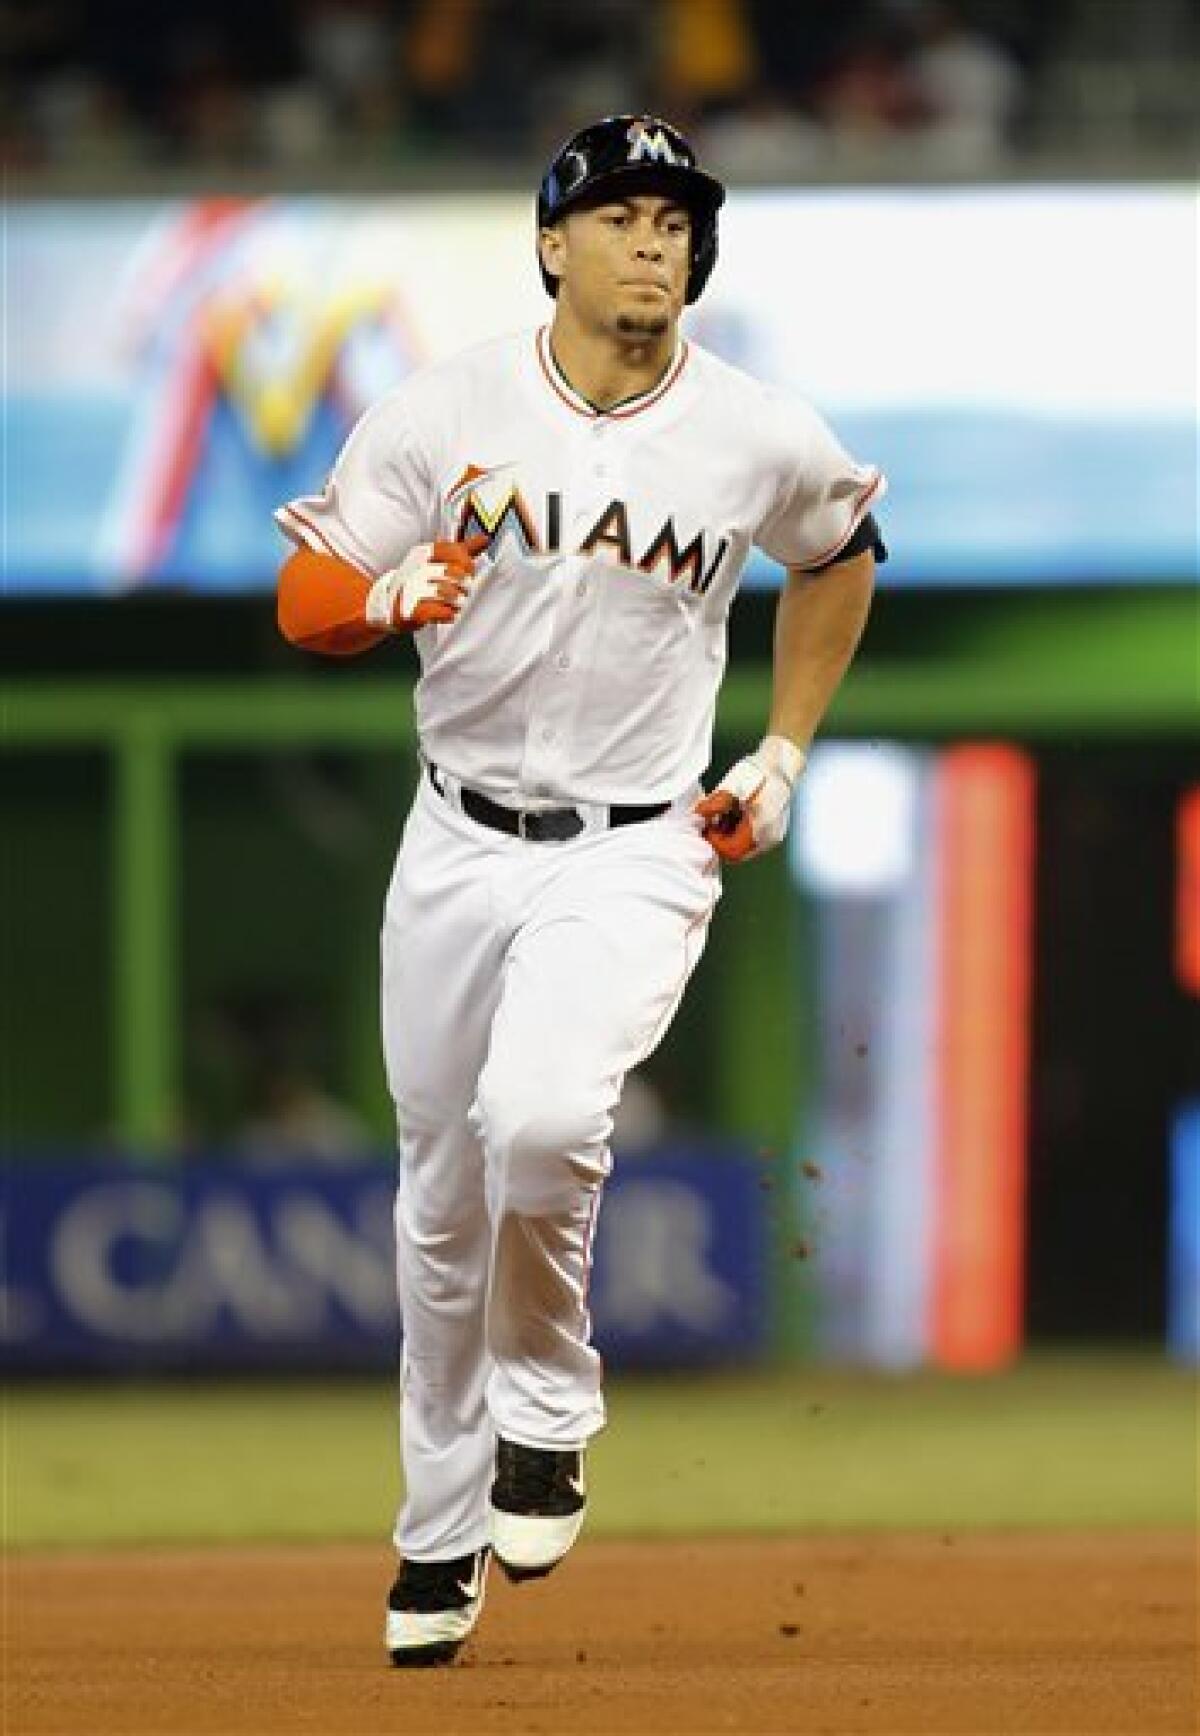 Giancarlo Stanton: Why he signed with the Marlins - Sports